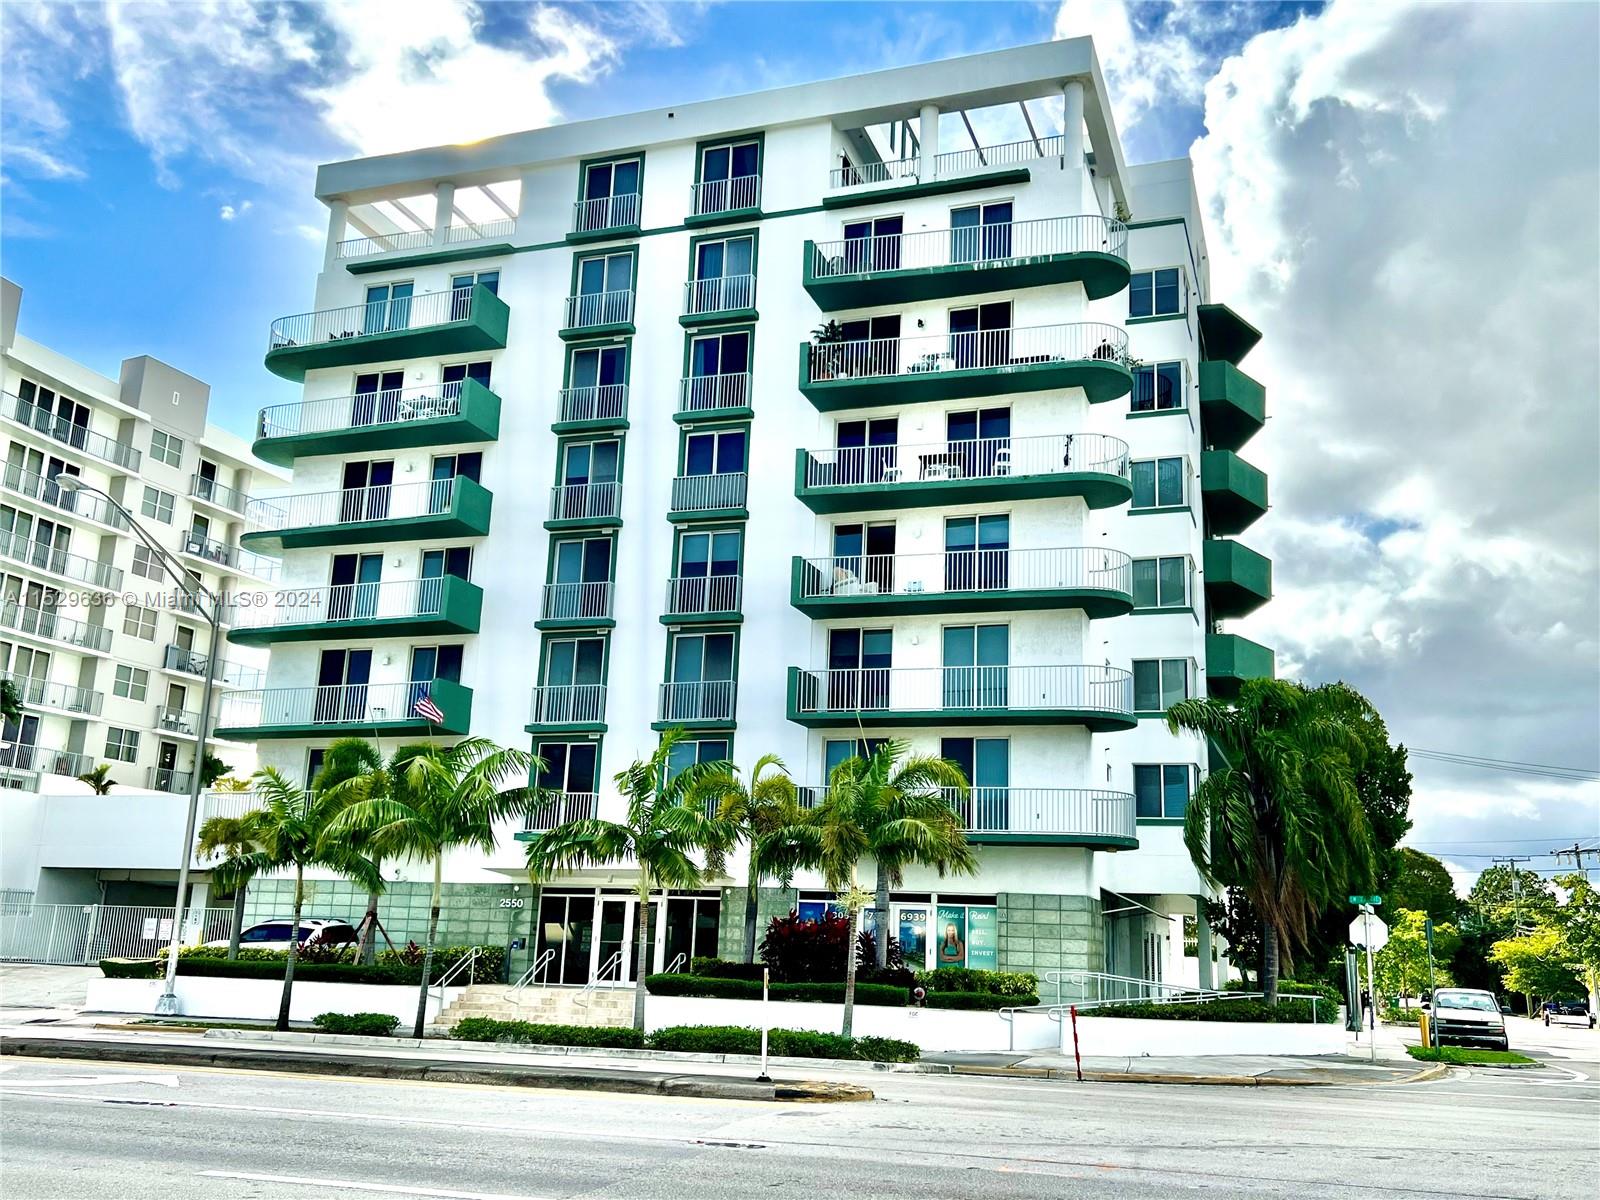 Conveniently situated in Coconut Grove, this condo offers easy access to downtown Miami's bustling business district, cultural attractions, and entertainment venues. Enjoy the neighborhood's trendy cafes, boutique shops, and scenic parks just steps from your doorstep.  Modern open-concept layout, spacious living area with ample natural light, master bedroom with en-suite bathroom and walk-in closet, half bathroom for guests, private balcony with views of the city skyline, in-unit washer/dryer.  Amenities include; swimming pool, fitness center, secured parking, pet friendly community, and secured building.